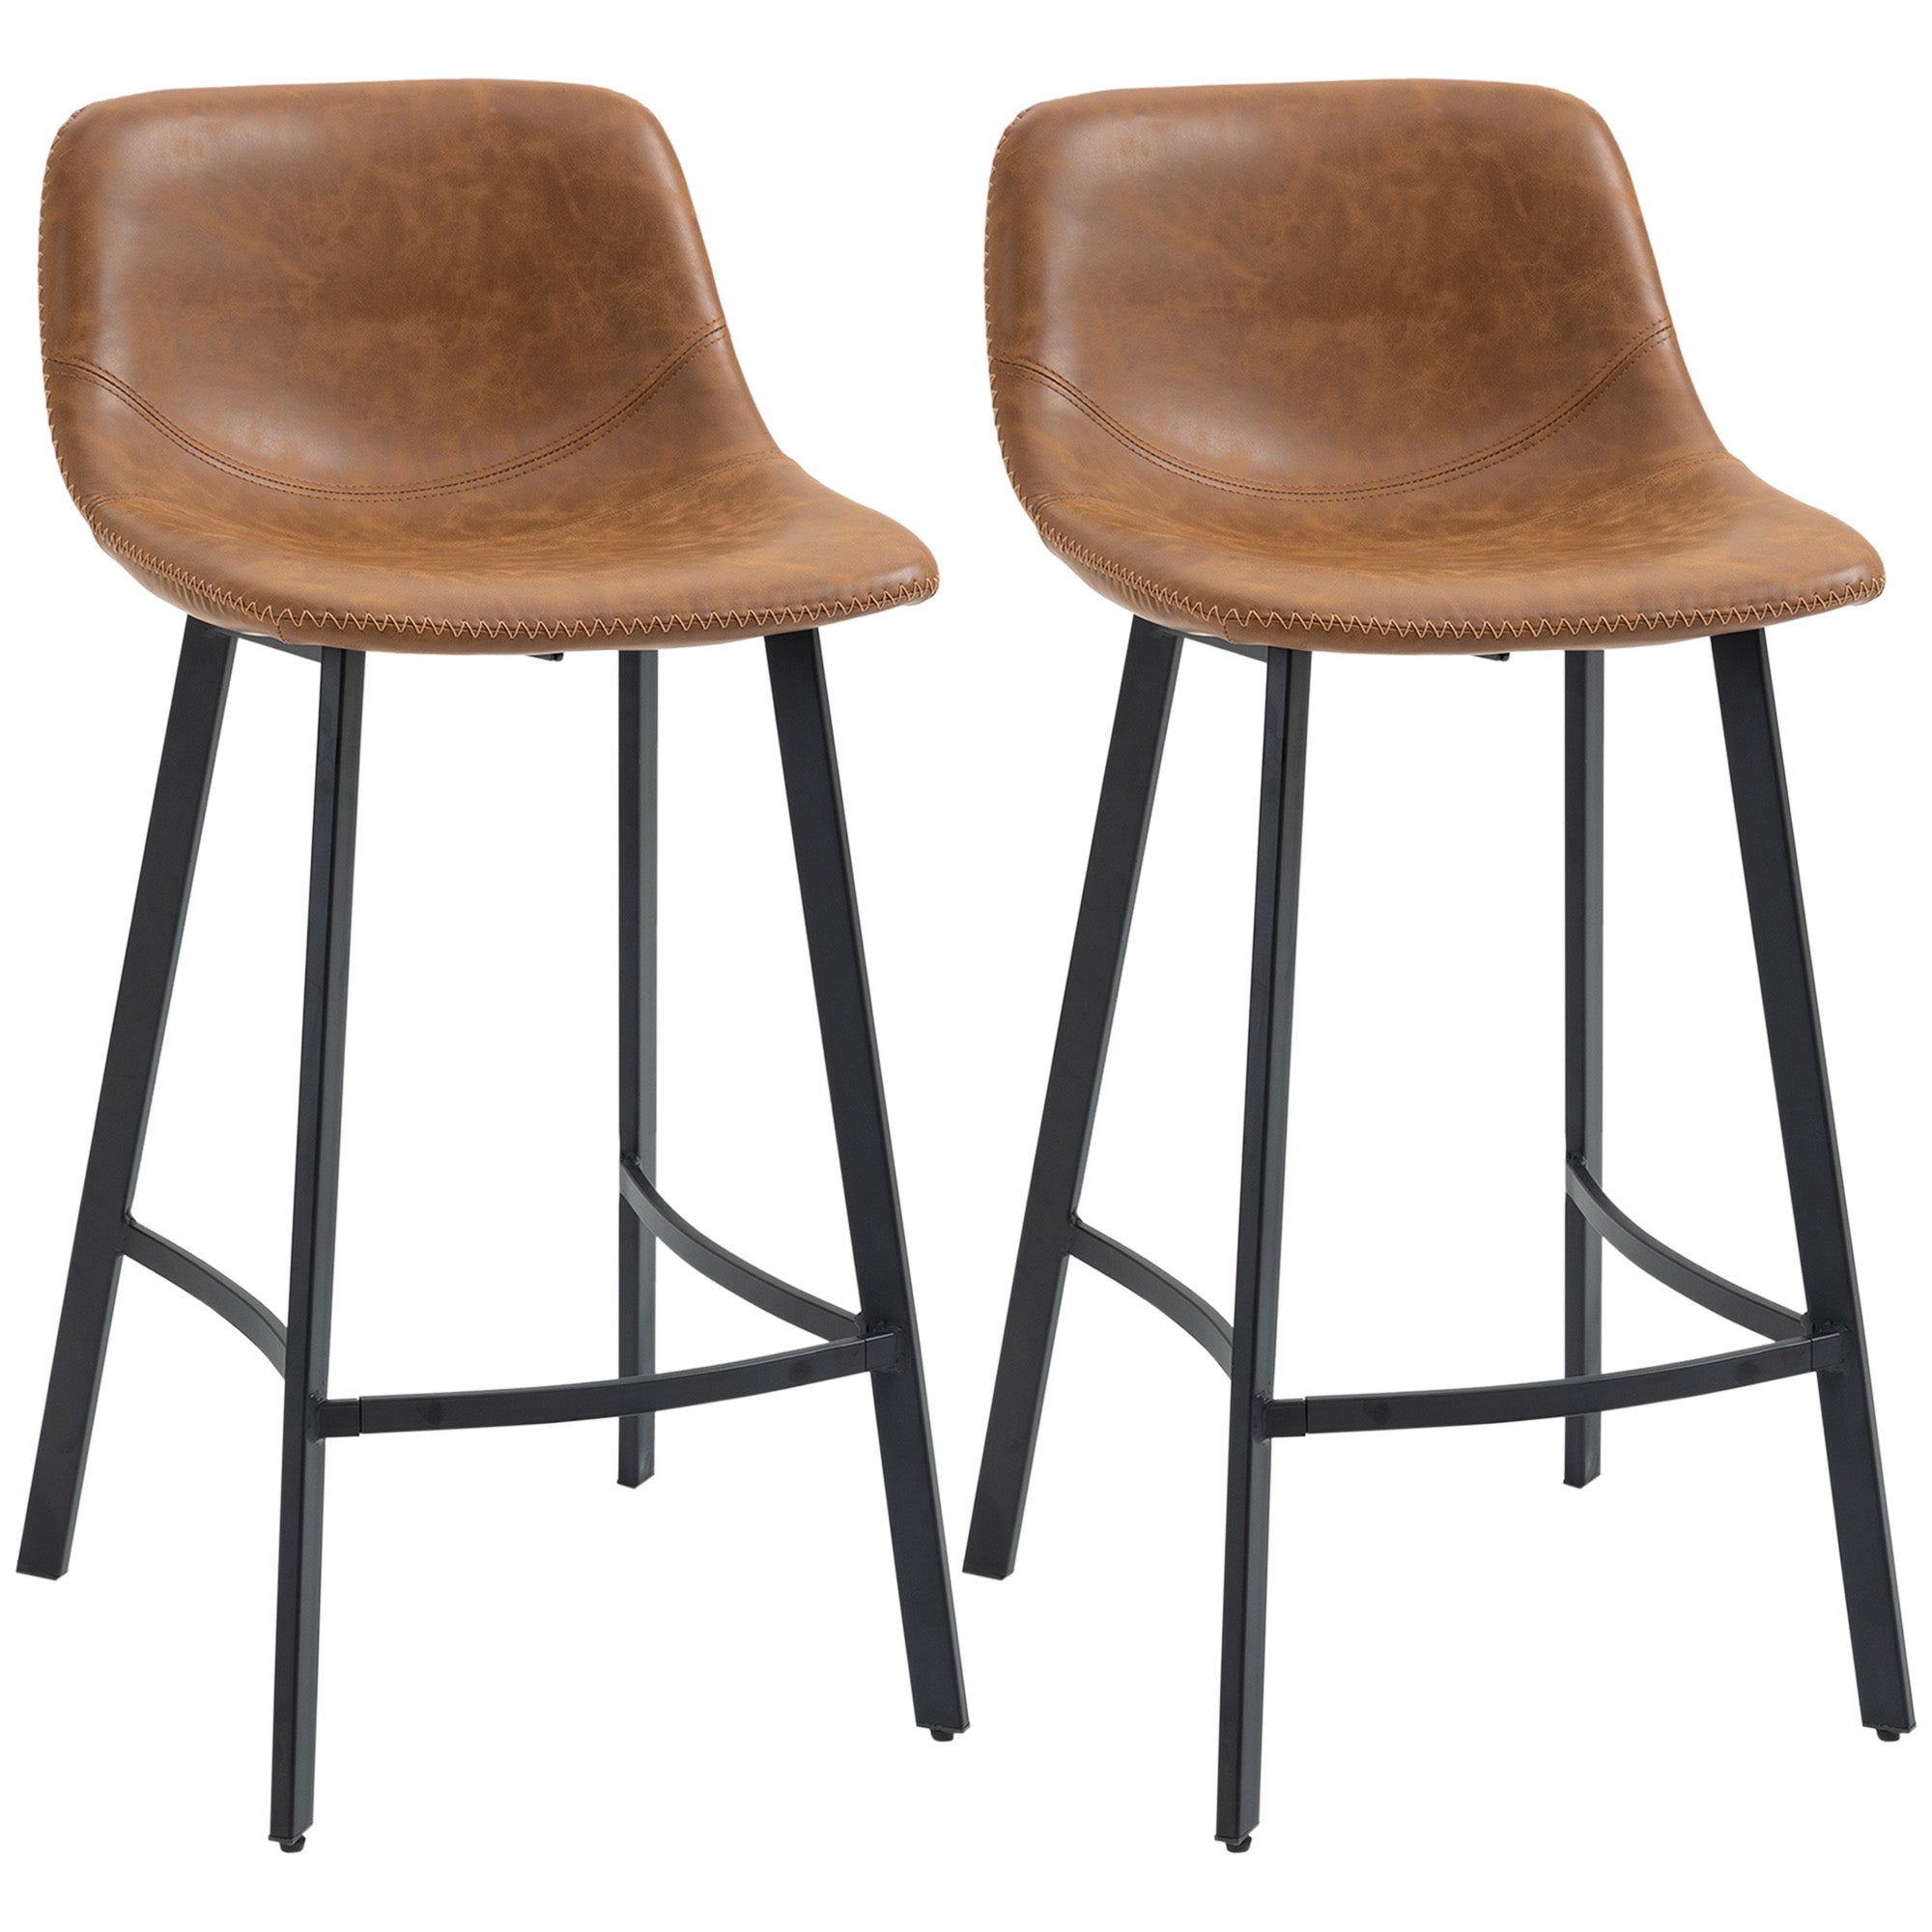 Bar Stools Set of 2, Industrial Kitchen Stool, Upholstered Bar Chairs with Back, Steel Legs, Brown-0